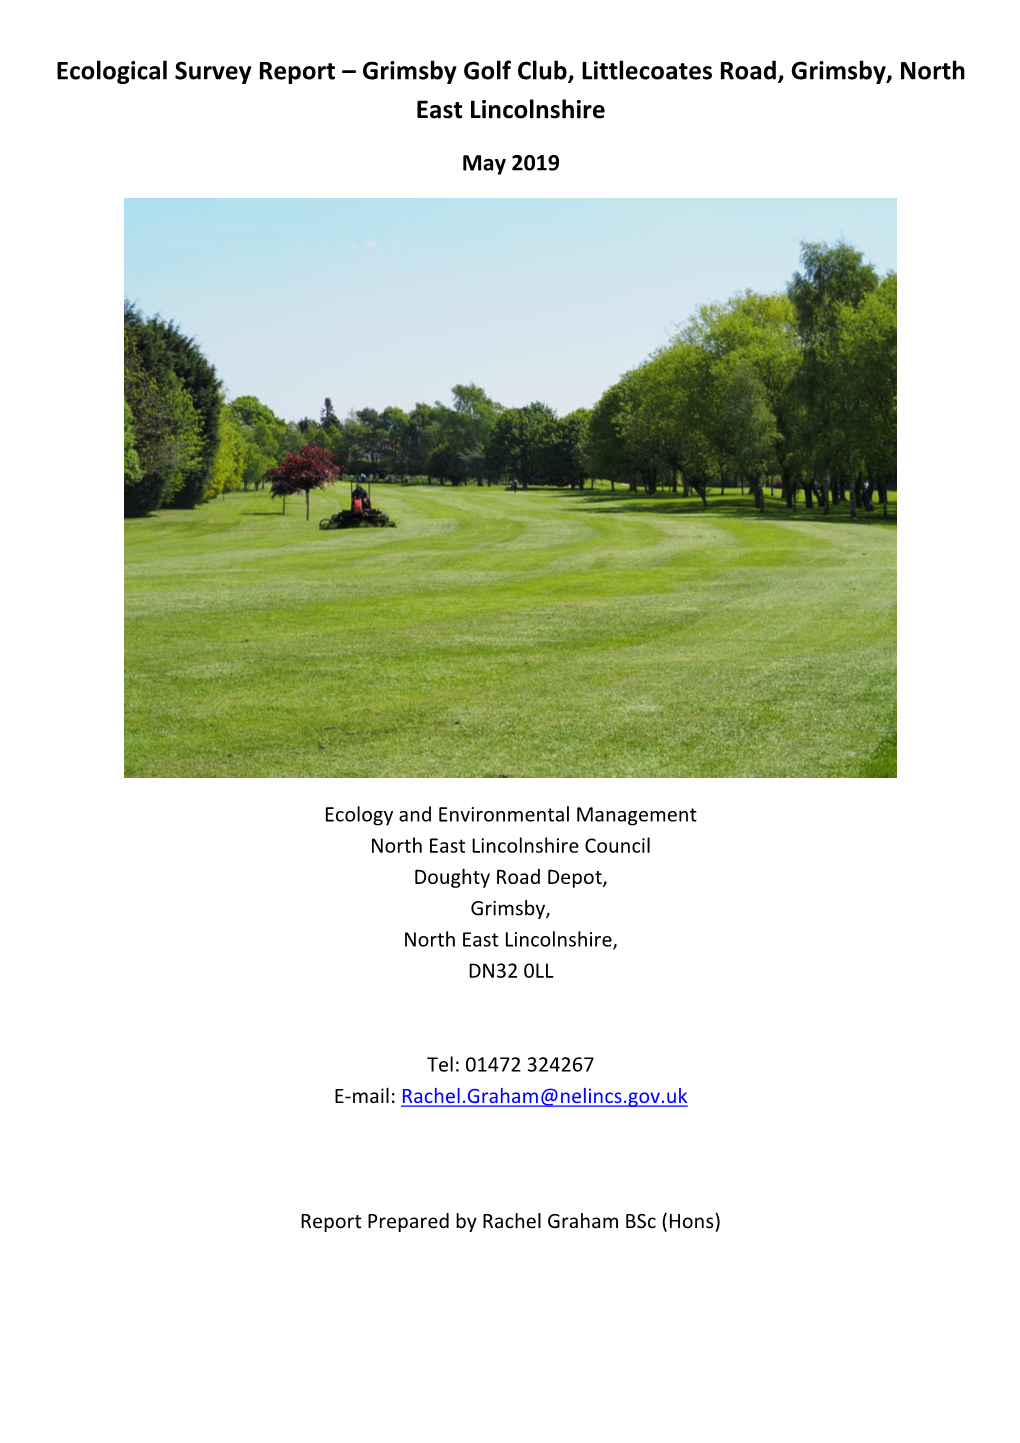 Ecological Survey Report – Grimsby Golf Club, Littlecoates Road, Grimsby, North East Lincolnshire